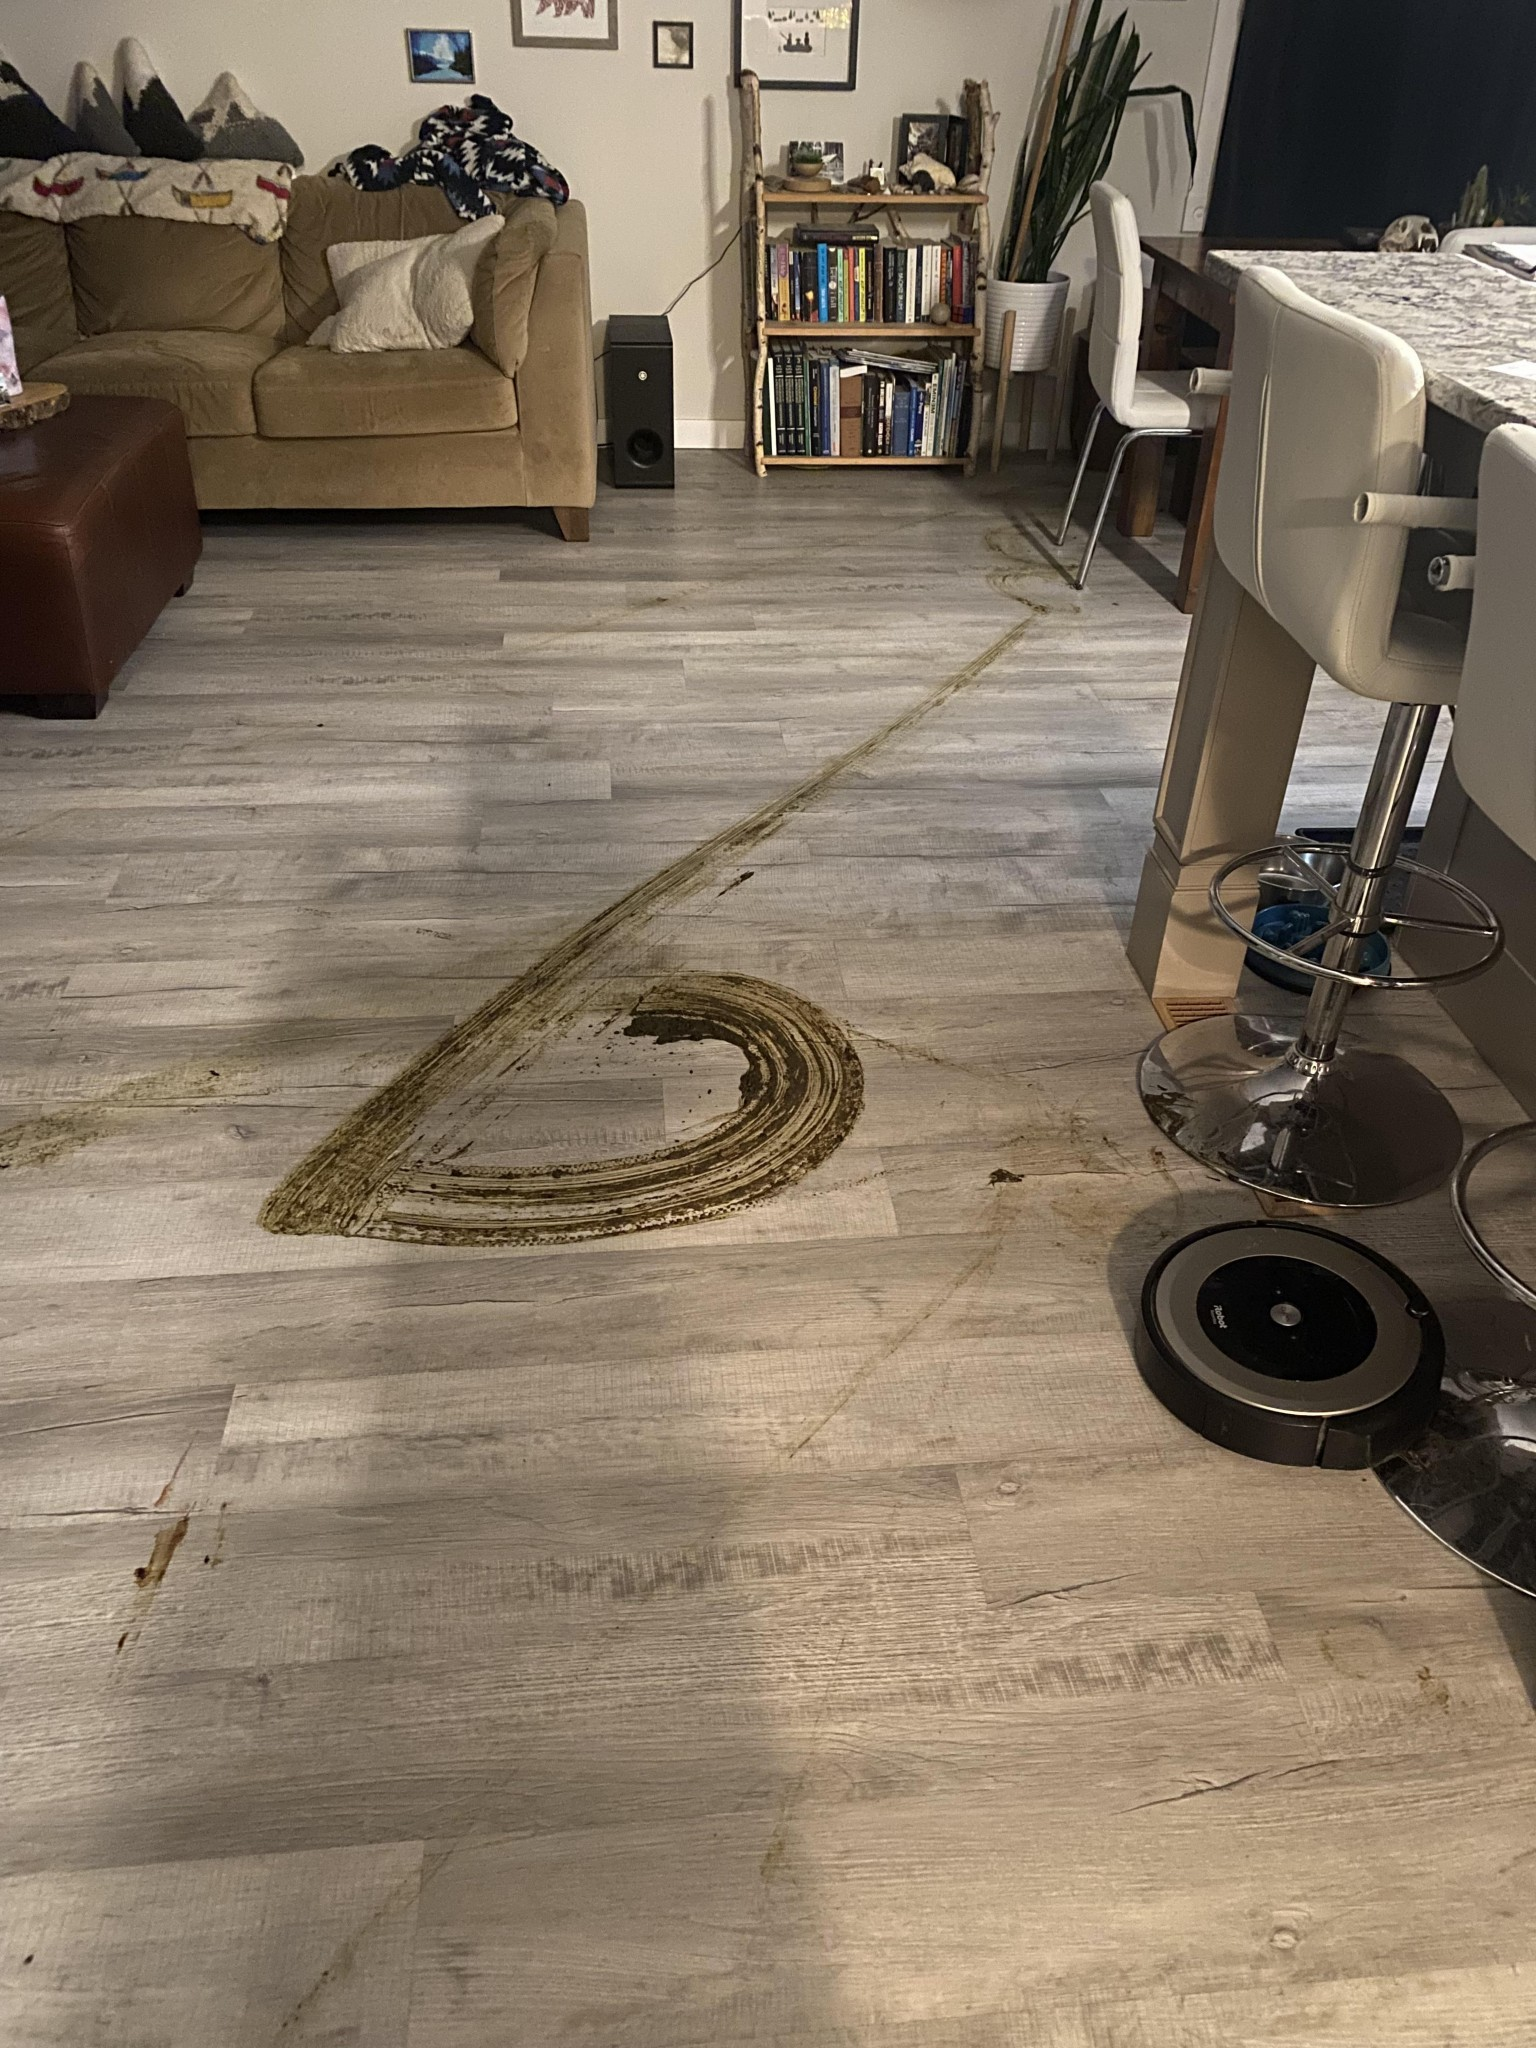 High Quality Roomba smearing poop Blank Meme Template